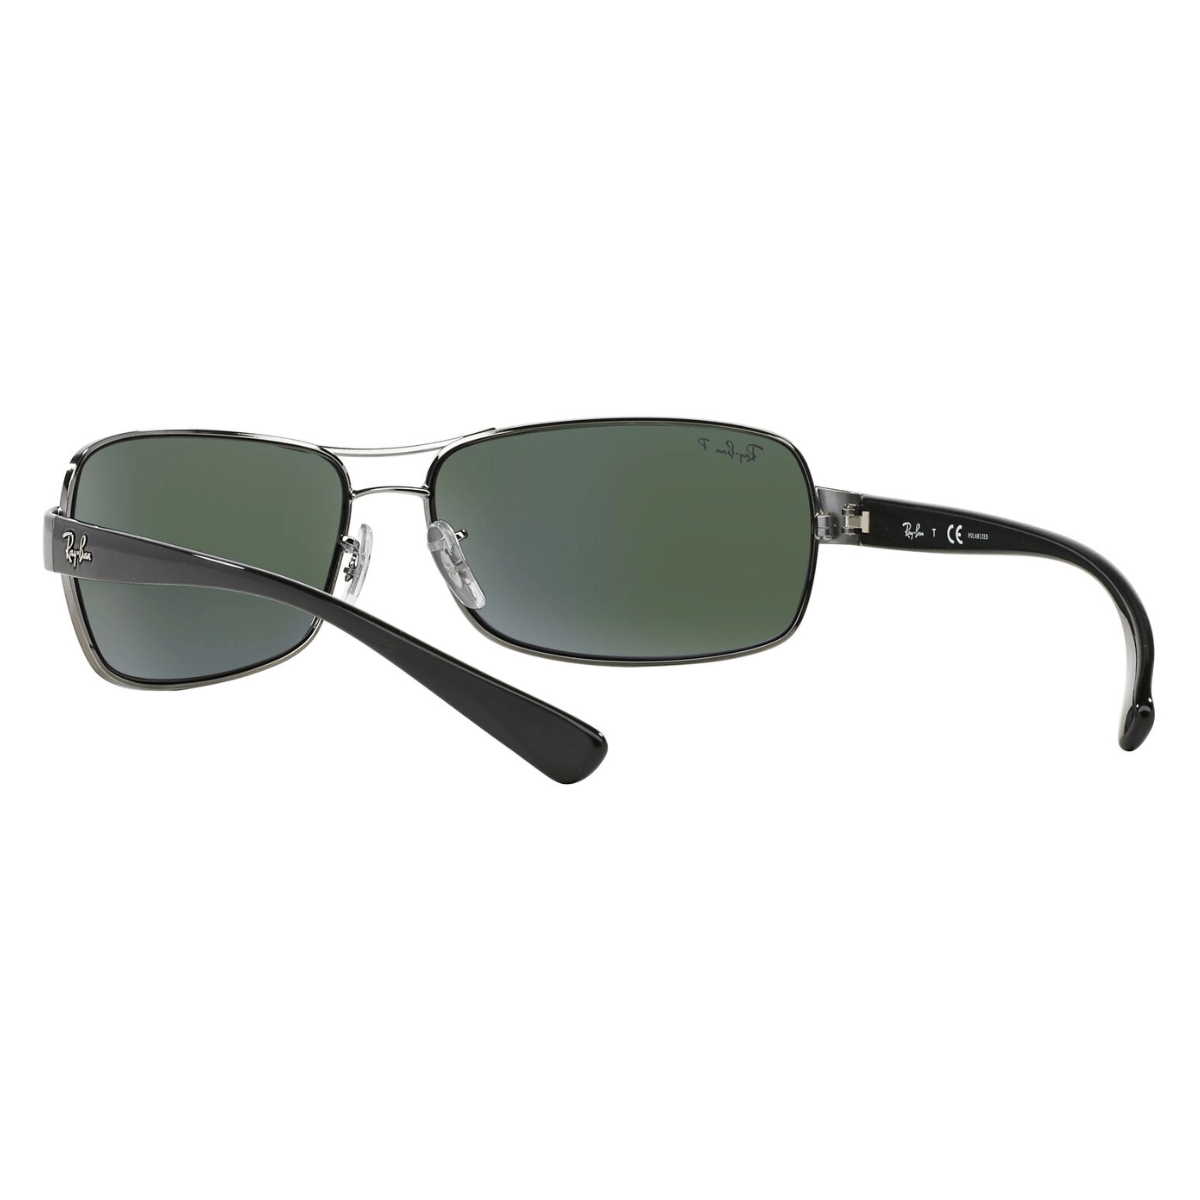 "Discover the perfect blend of style and functionality with the unisex Ray-Ban 3379 sunglasses in gunmetal and green, available now at Optorium."